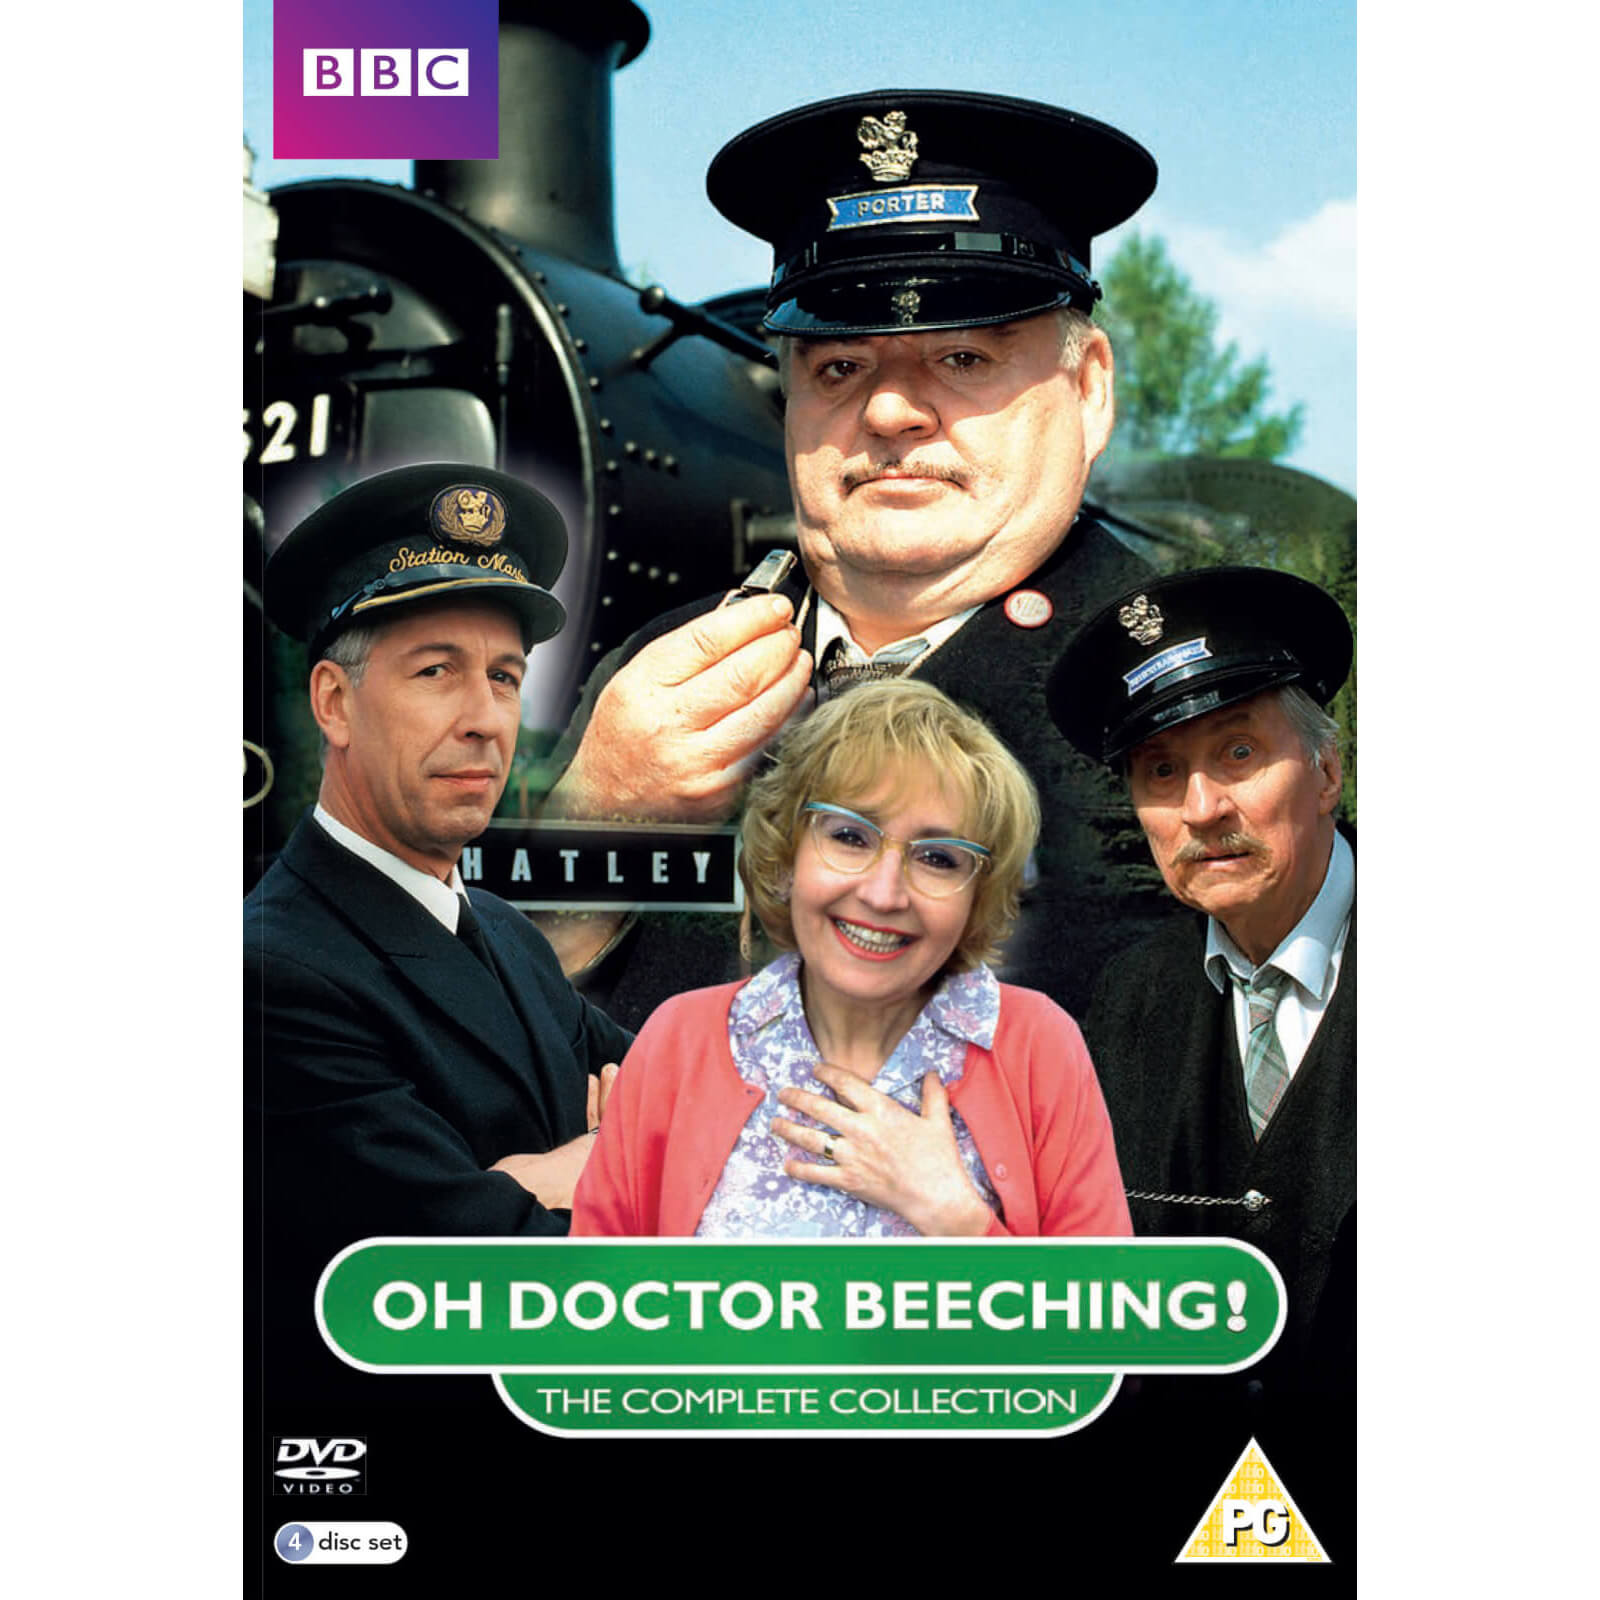 Oh Doctor Beeching! Collection complète